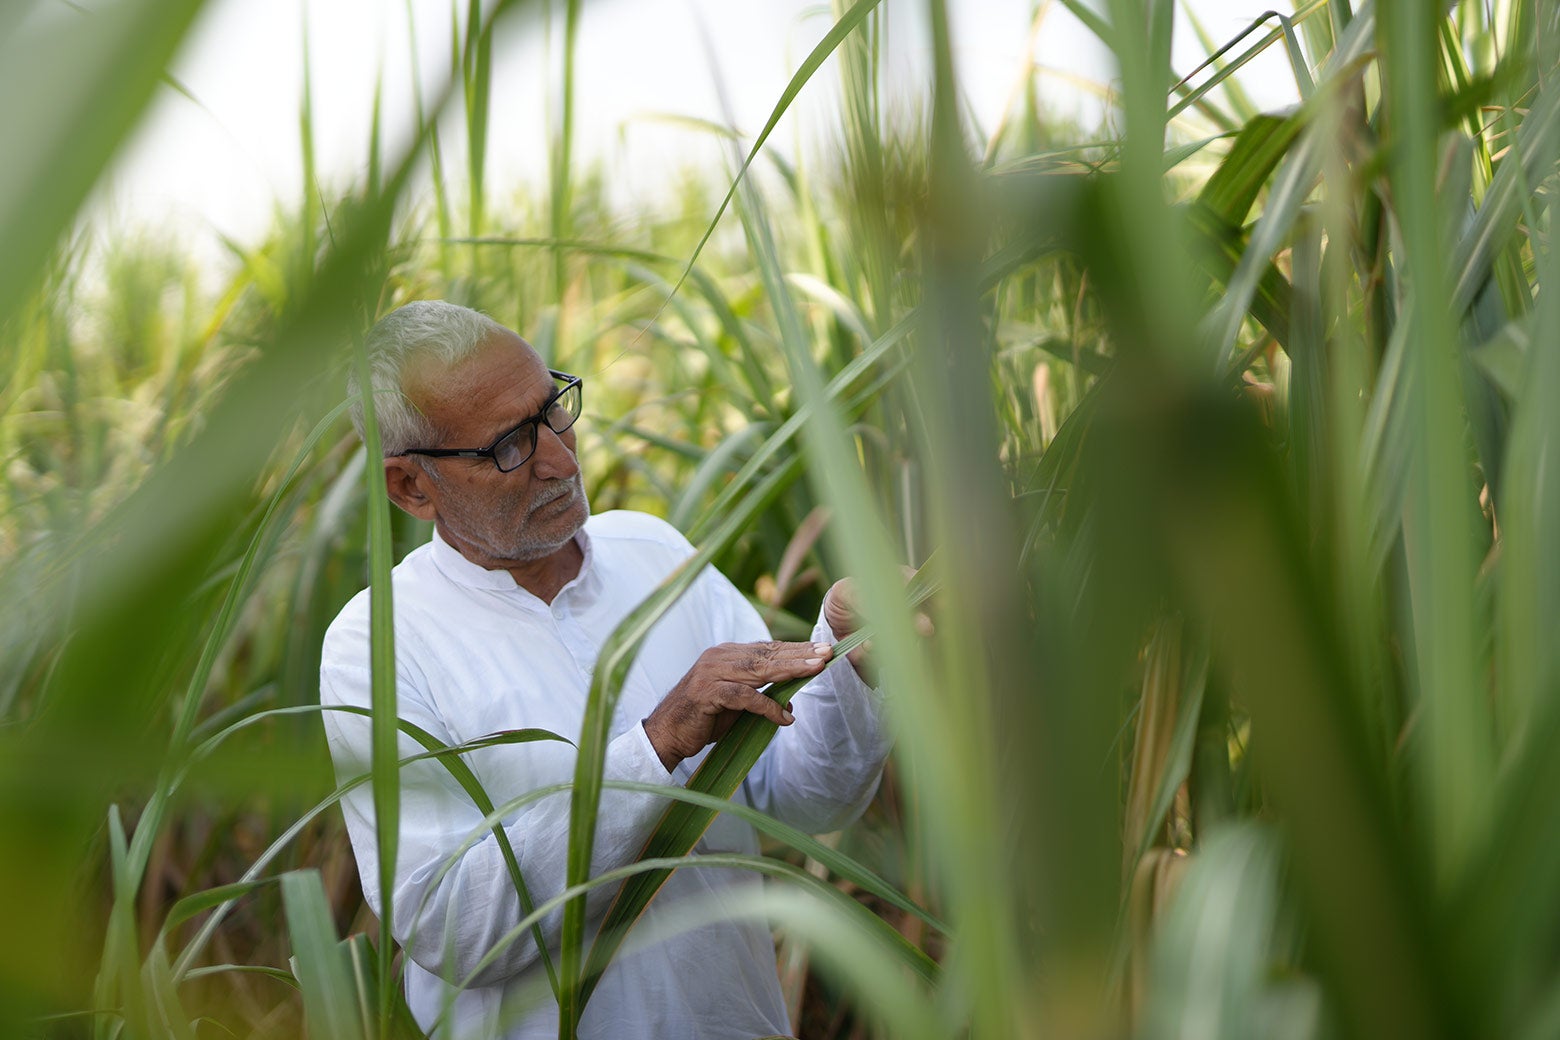 Satya Pal Singh, in a field of tall vegetation, inspects his sugarcane crop after an agricultural drone sprayed insecticide.